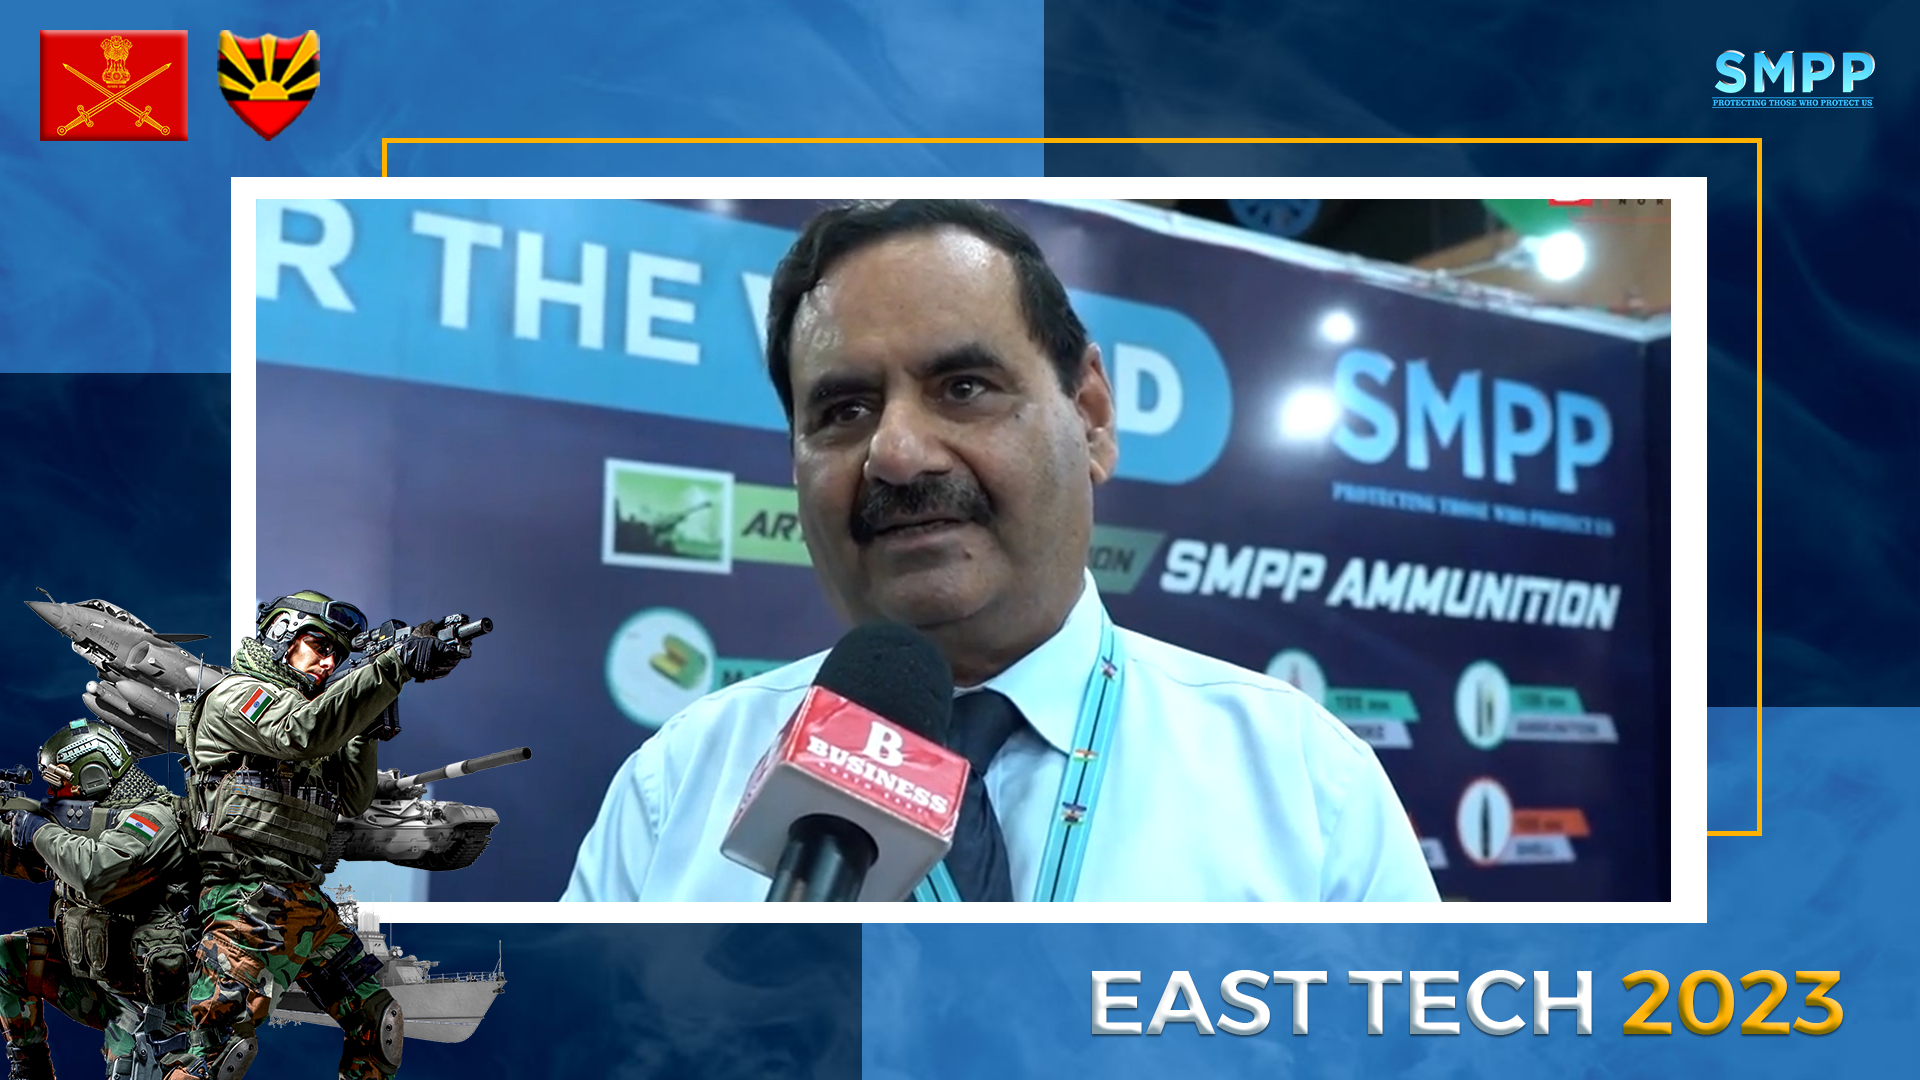 East Tech 2023: Indian Army’s Eastern Command Promotes Indigenous Defense Manufacturing | SMPP